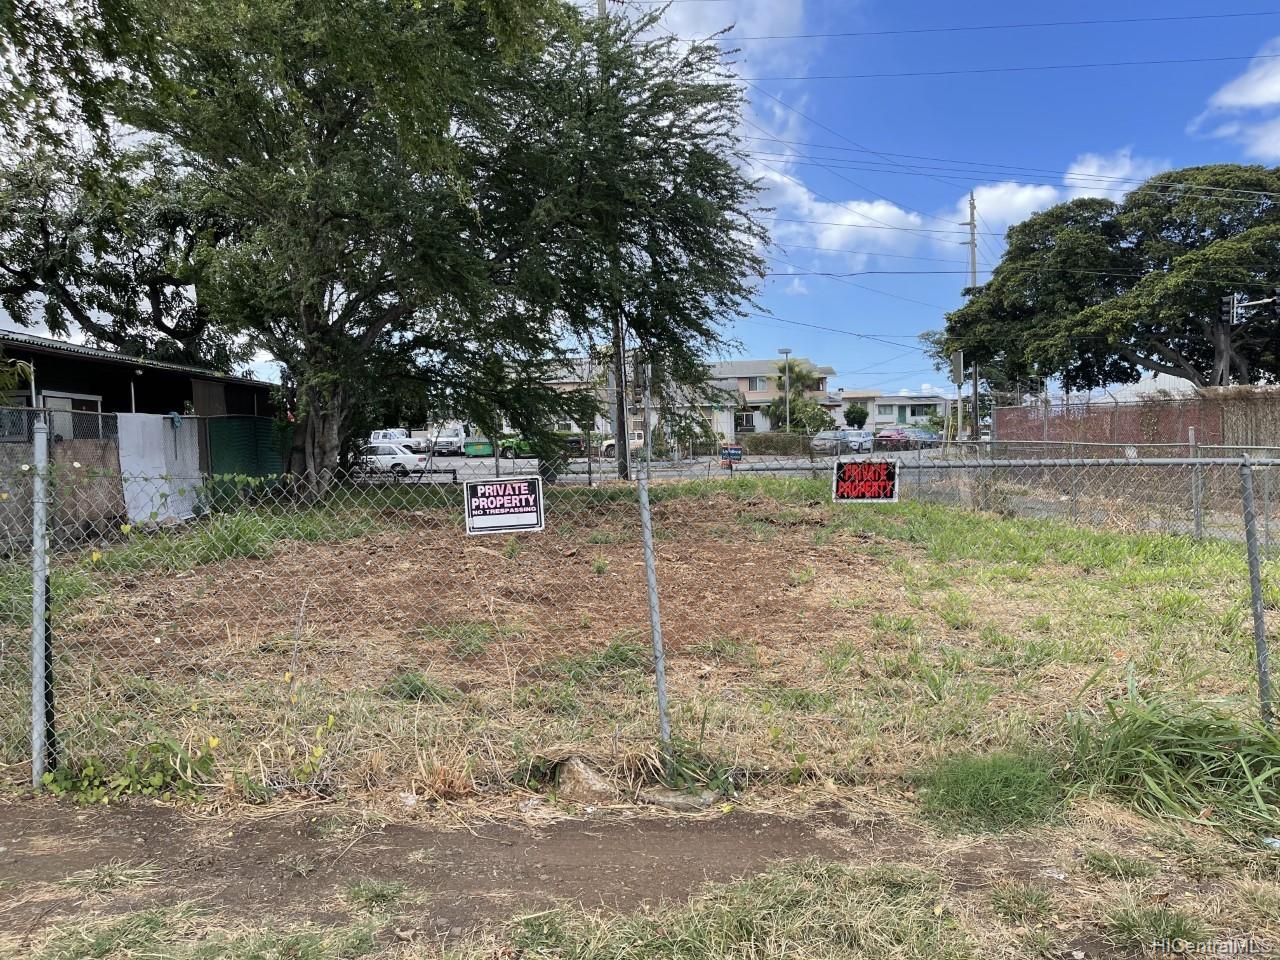 1304 Middle Street  Honolulu, Hi vacant land for sale - photo 3 of 6